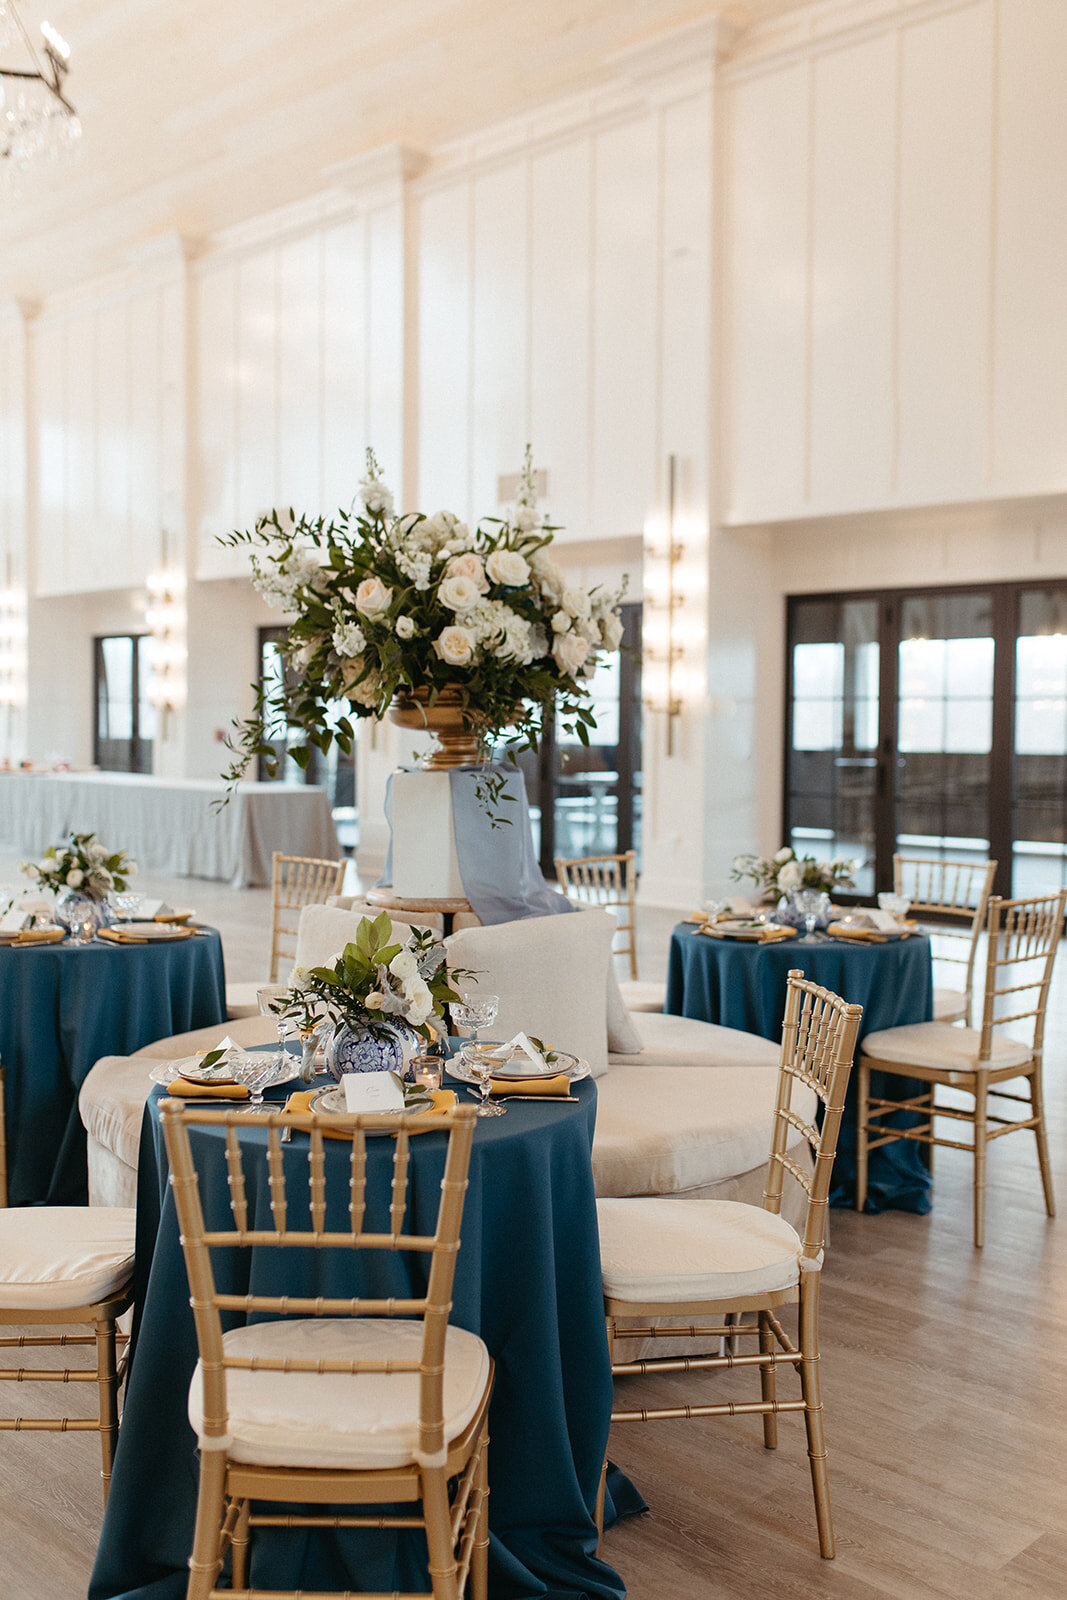 A bright and airy banquet room with blue satin linens on round tables, gold chairs and white floral arrangements.